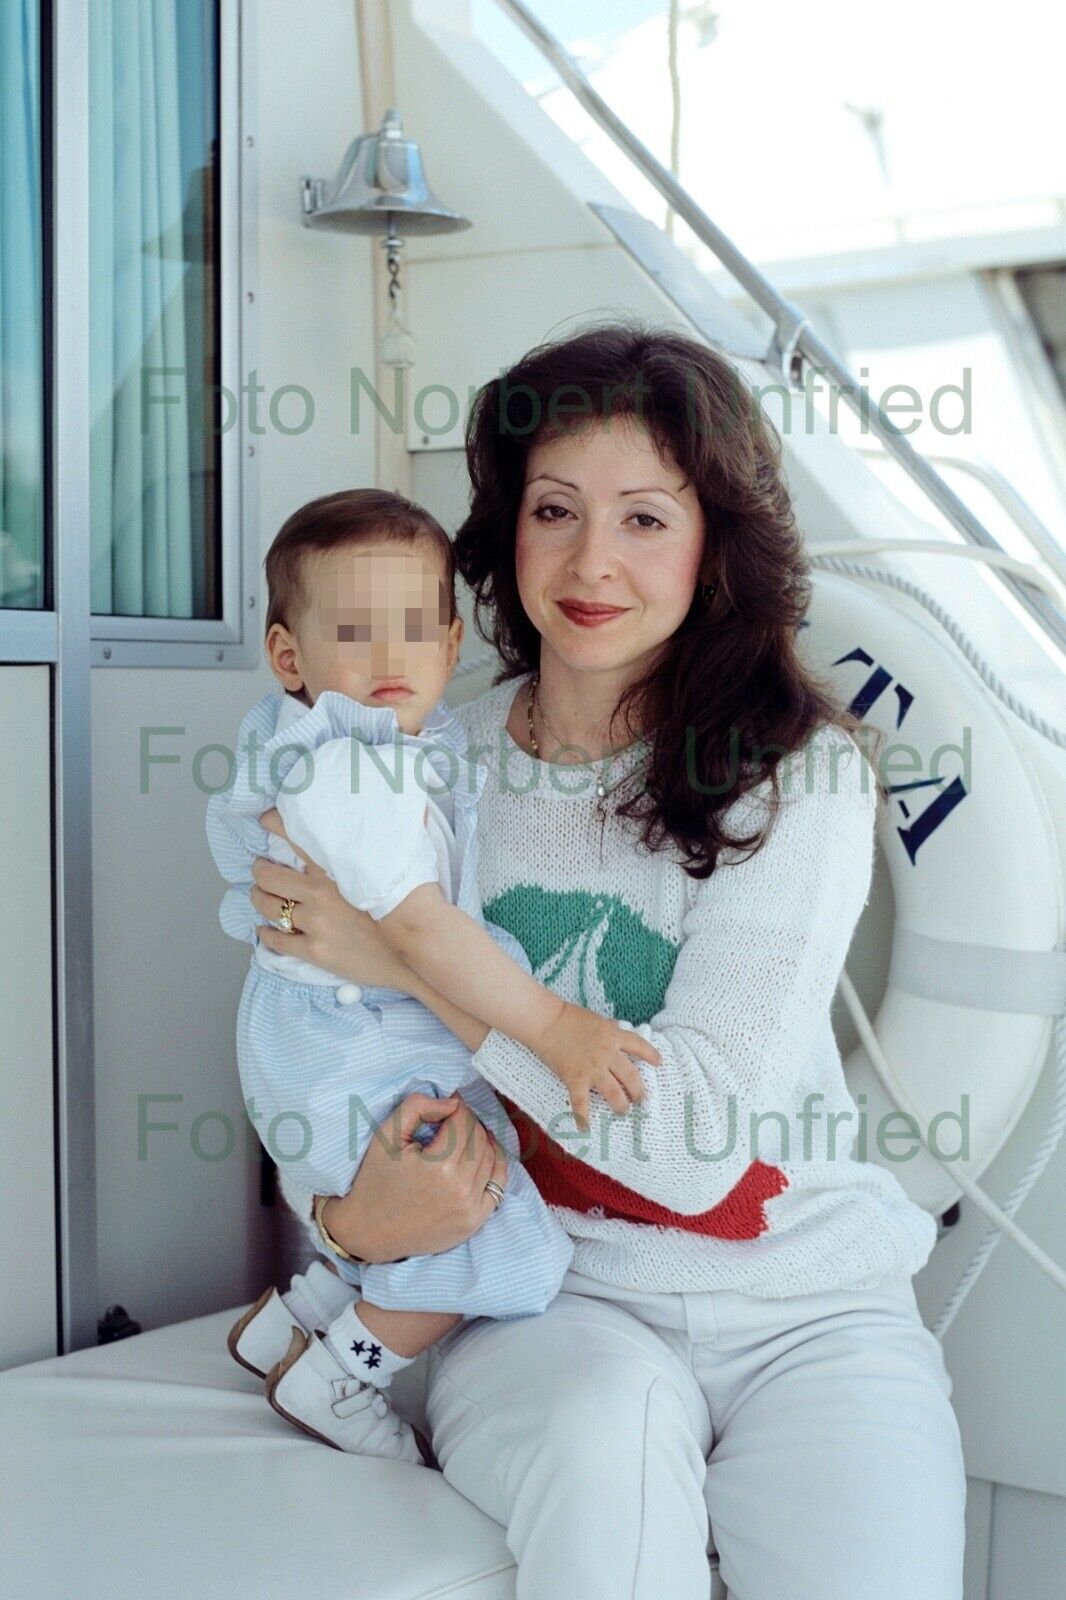 Vicky Leandros With Child - Photo Poster painting 20 X 30 CM Without Autograph (Nr 2-584